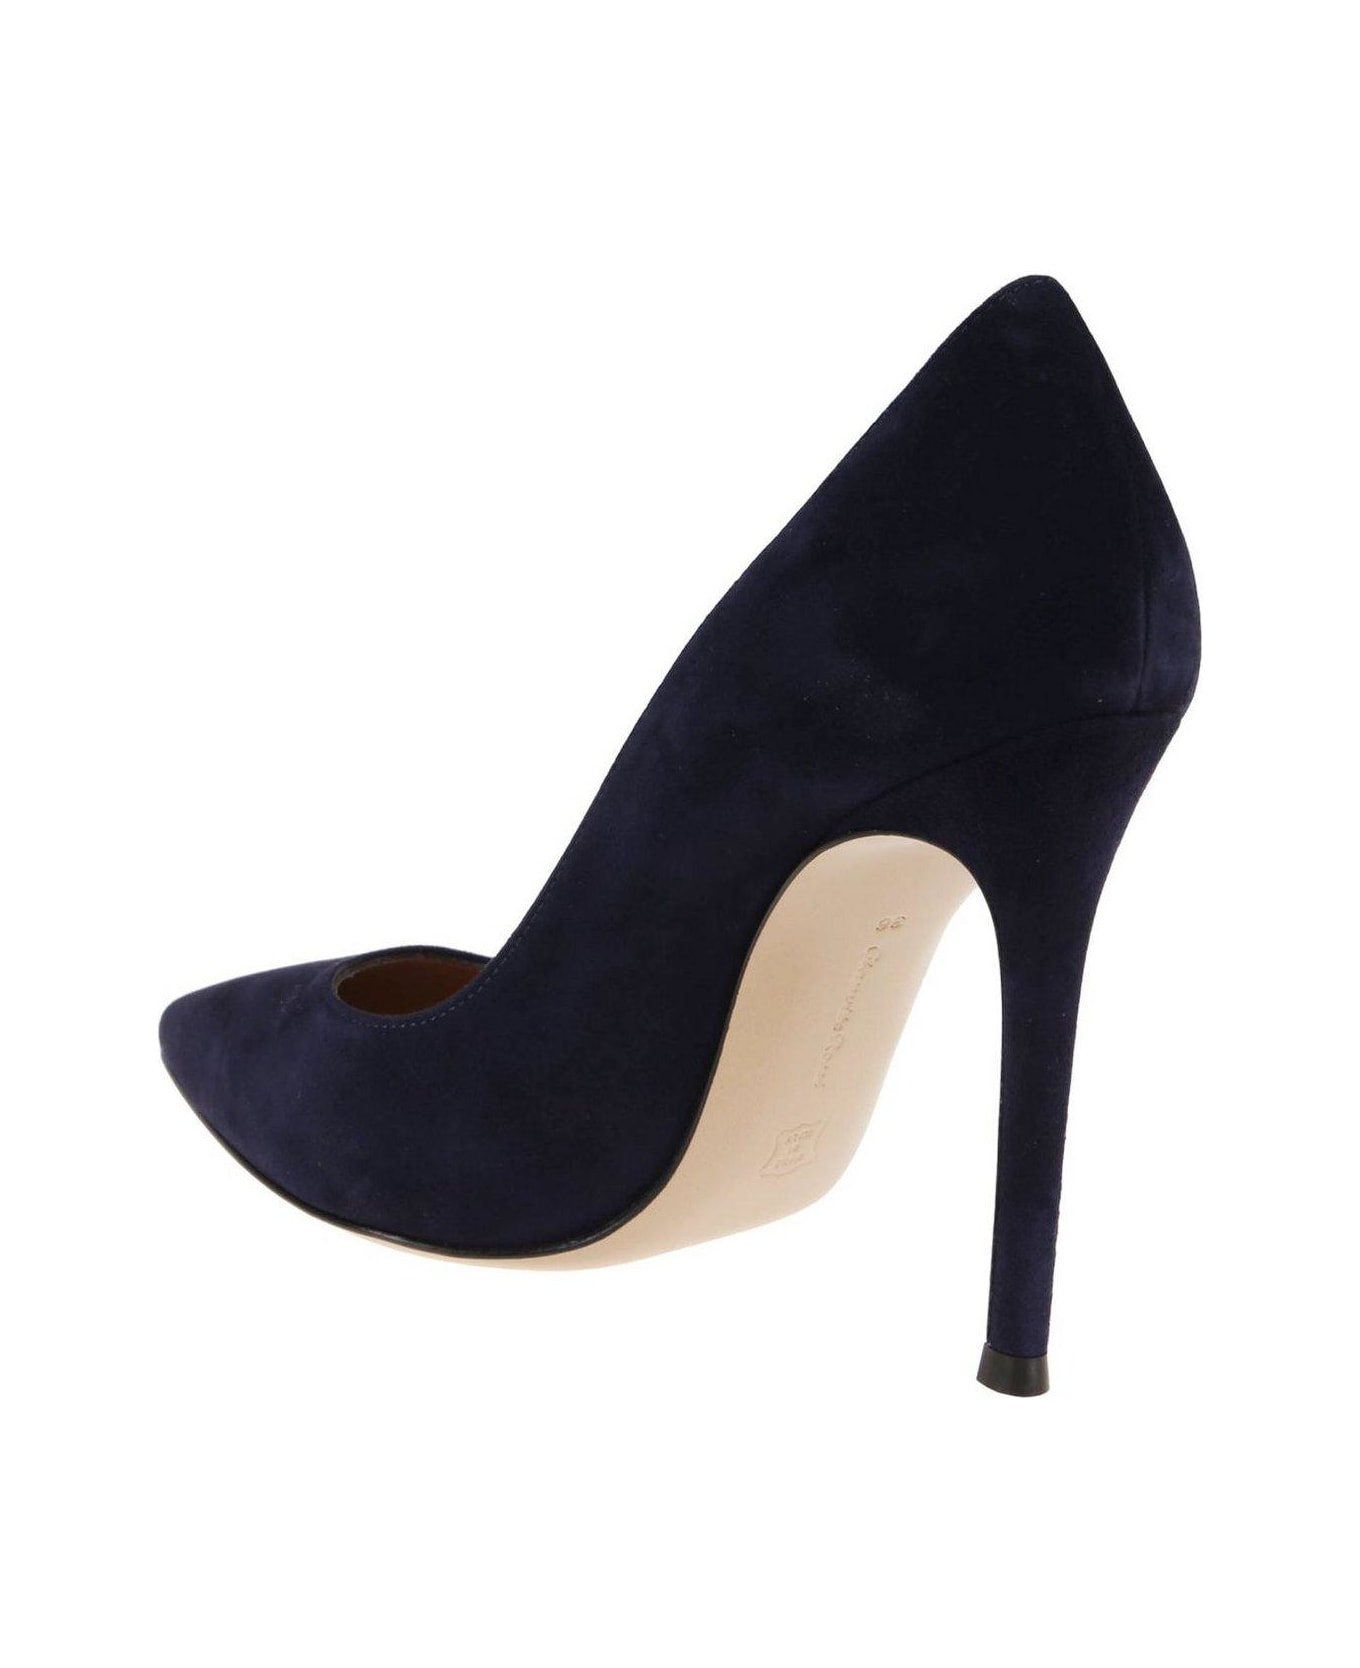 Gianvito Rossi Pointed Toe Pumps - Blue ハイヒール